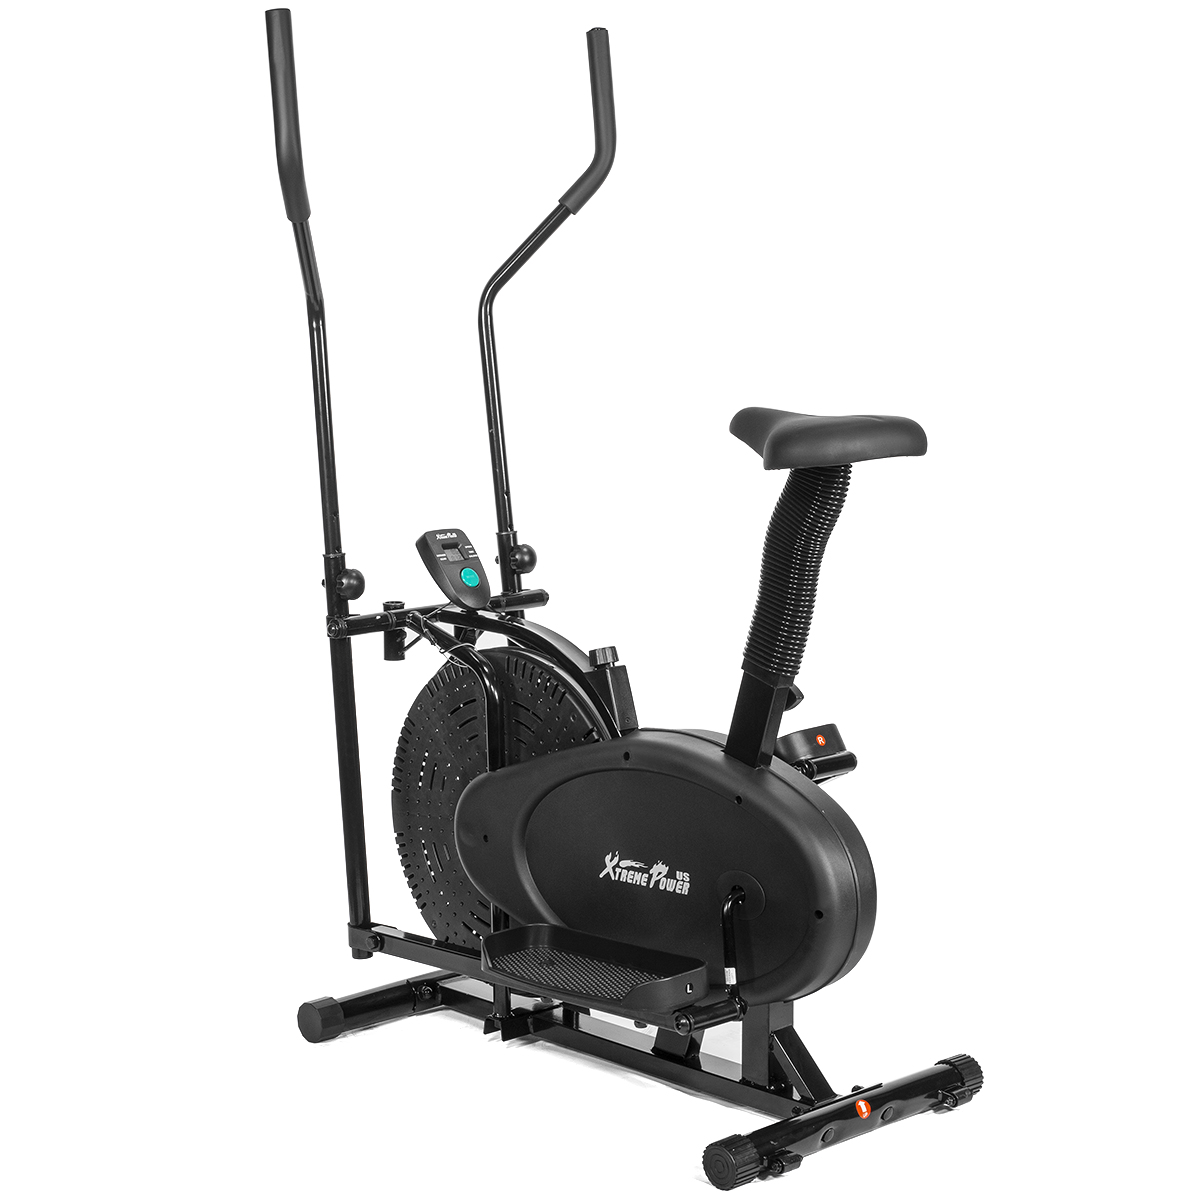 XtremepowerUS Elliptical Fan Bike Dual Action Cross Trainer Air Resistance System Machine Exercise Workout with LCD Monitor - image 2 of 7